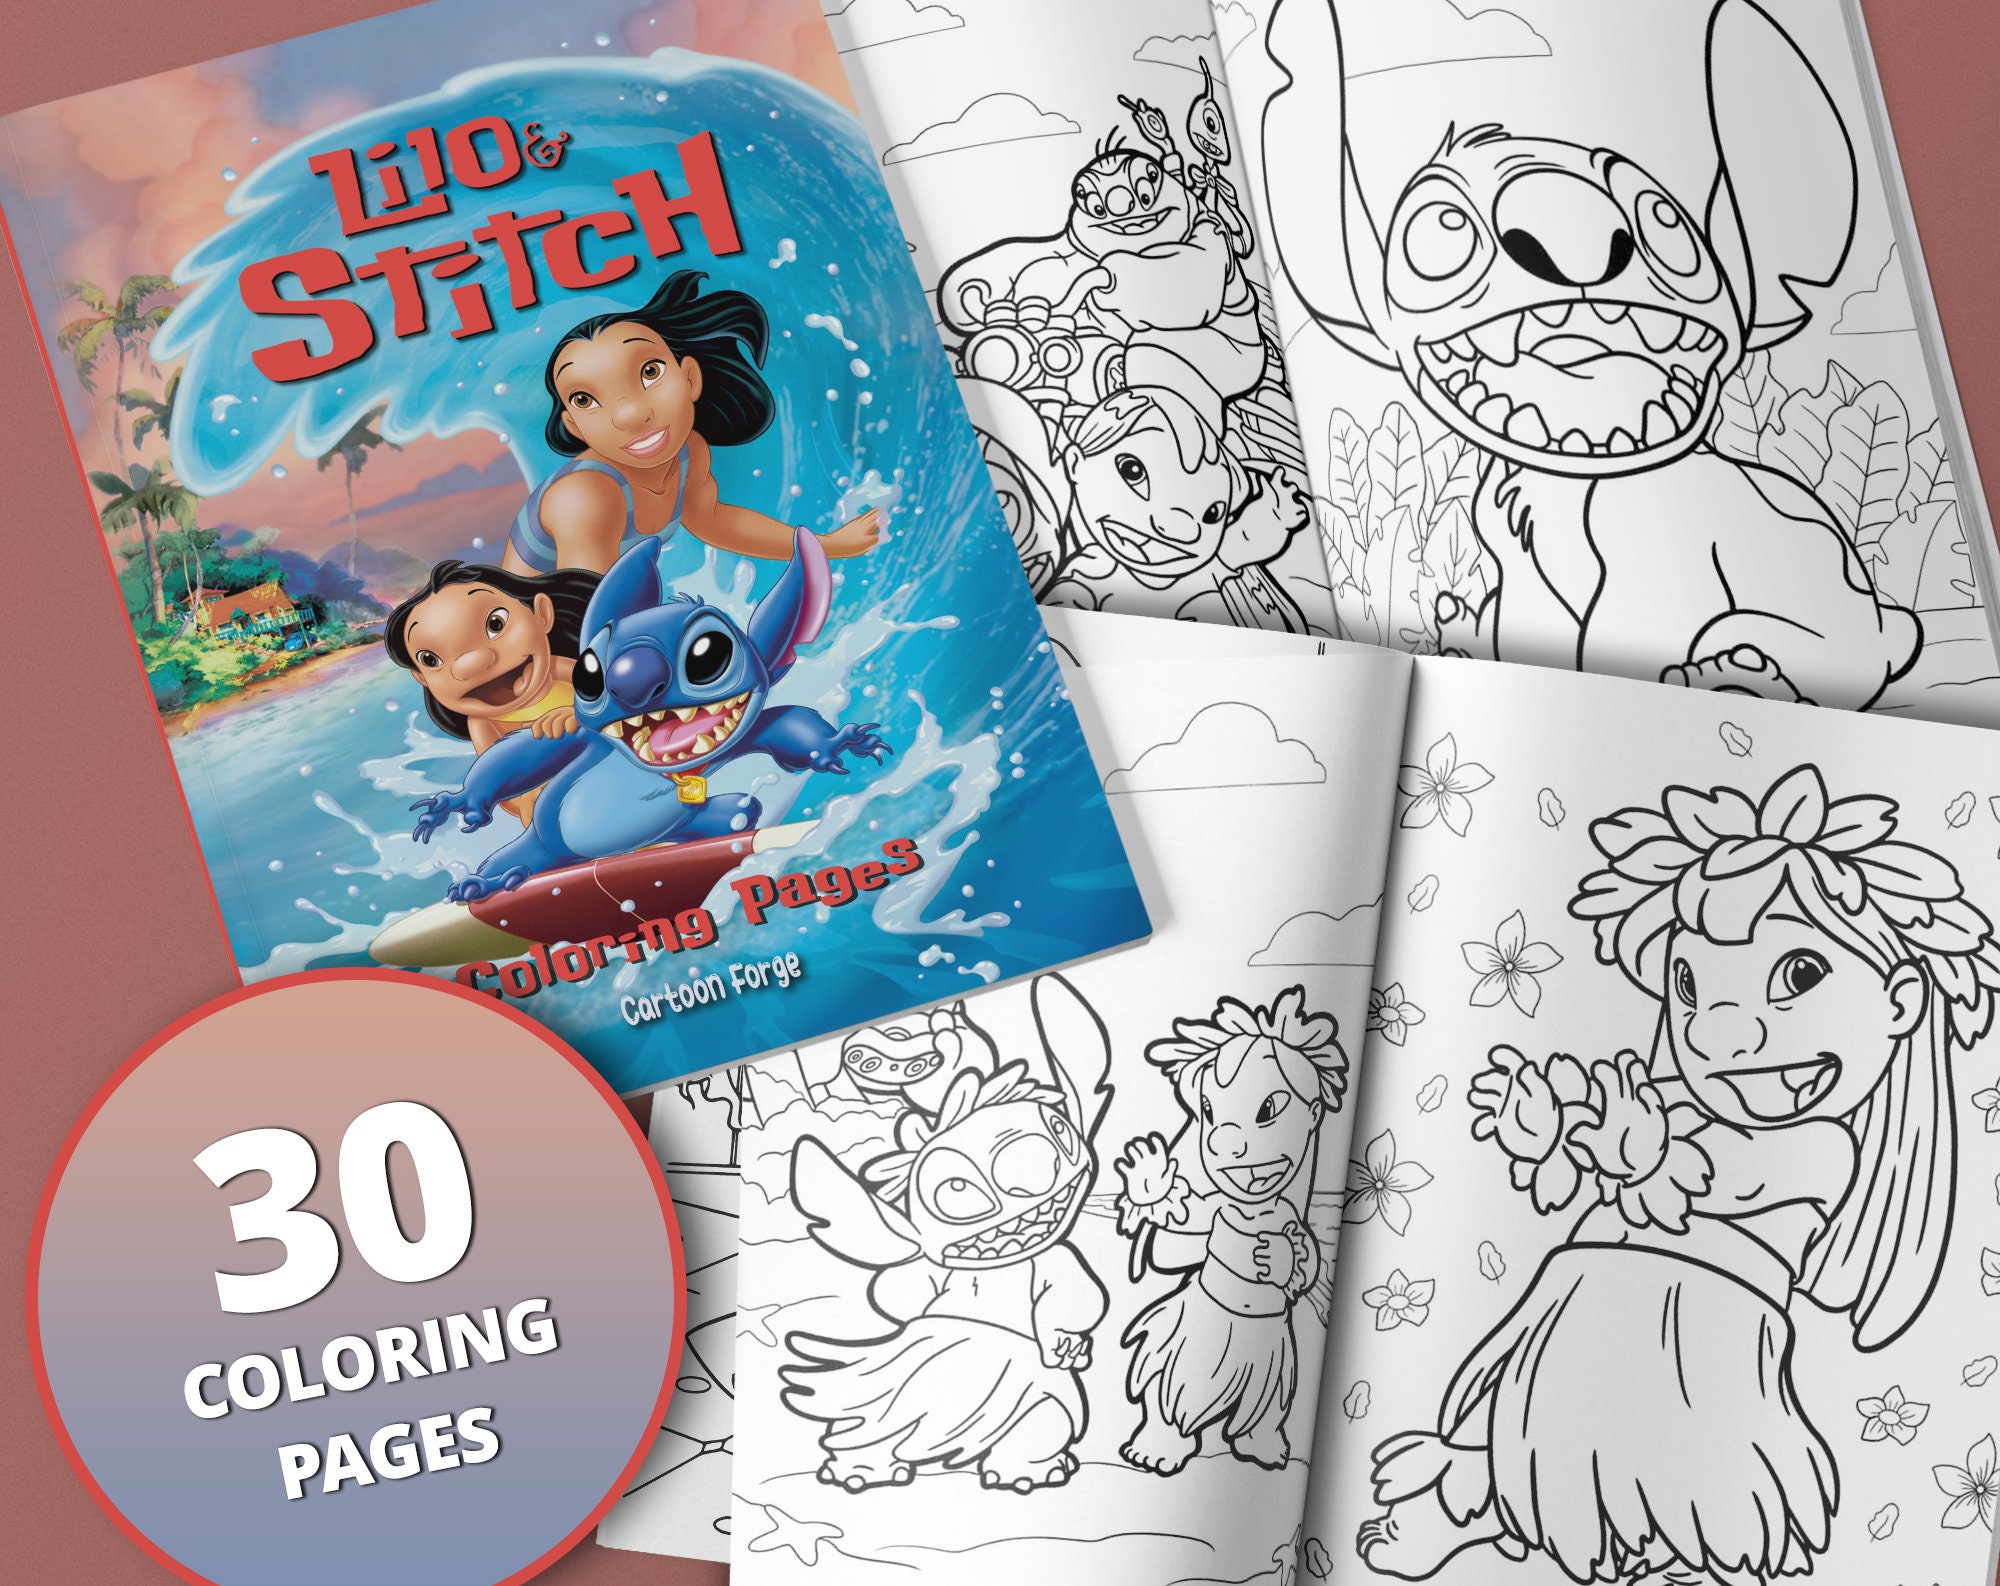 Lela And Stitch Coloring Pages